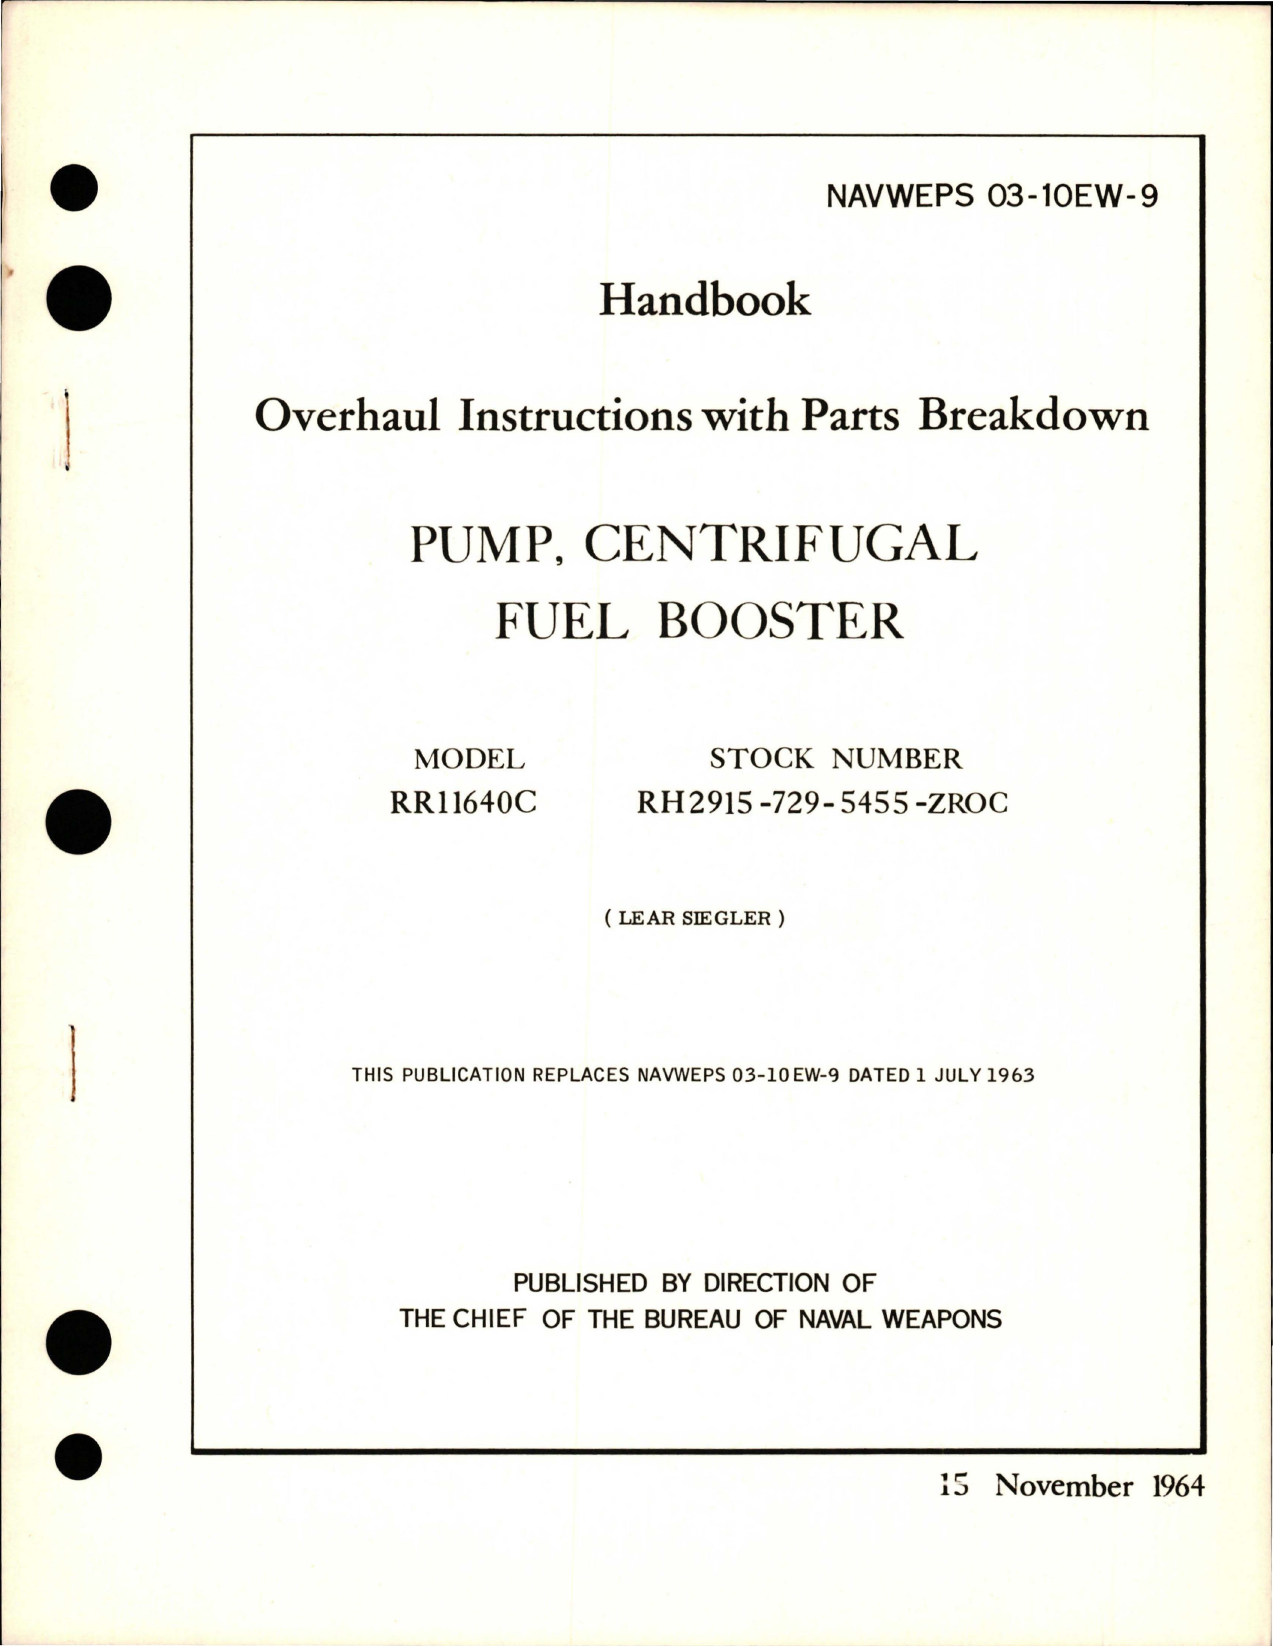 Sample page 1 from AirCorps Library document: Overhaul Instructions with Parts for Centrifugal Fuel Booster Pump - Model RR11640C